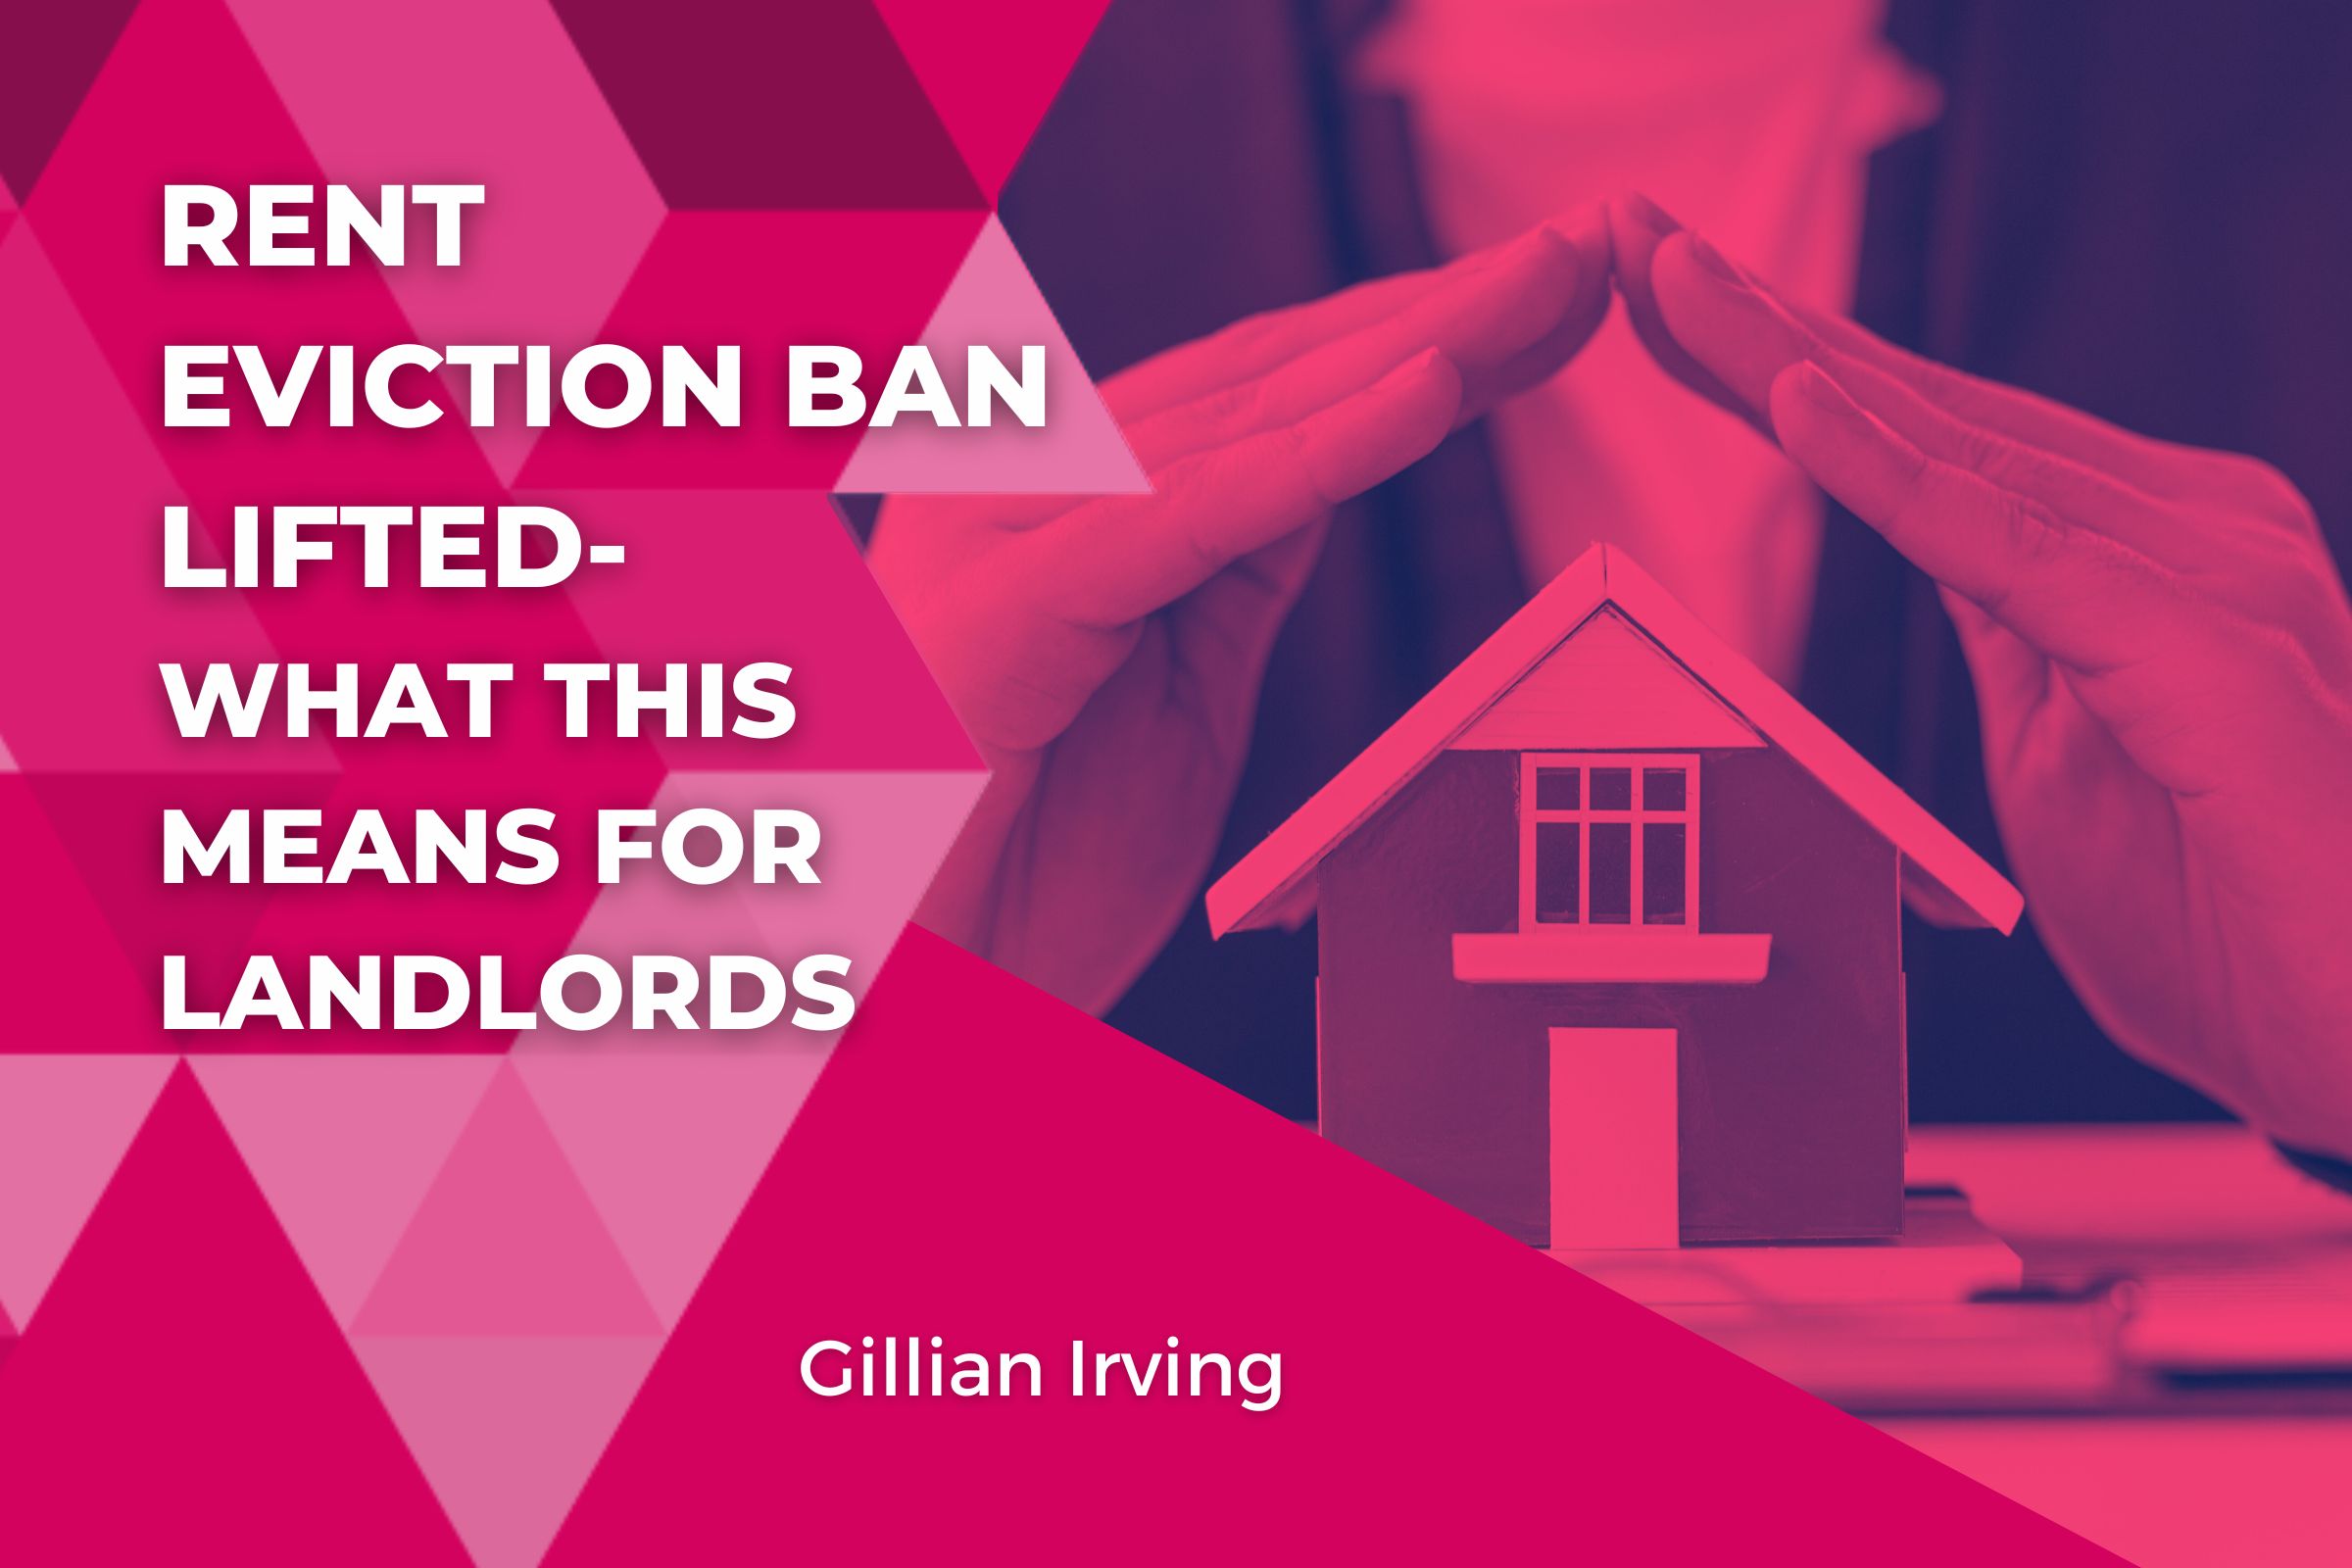 Rent Eviction Ban Lifted- What This Means for Landlords